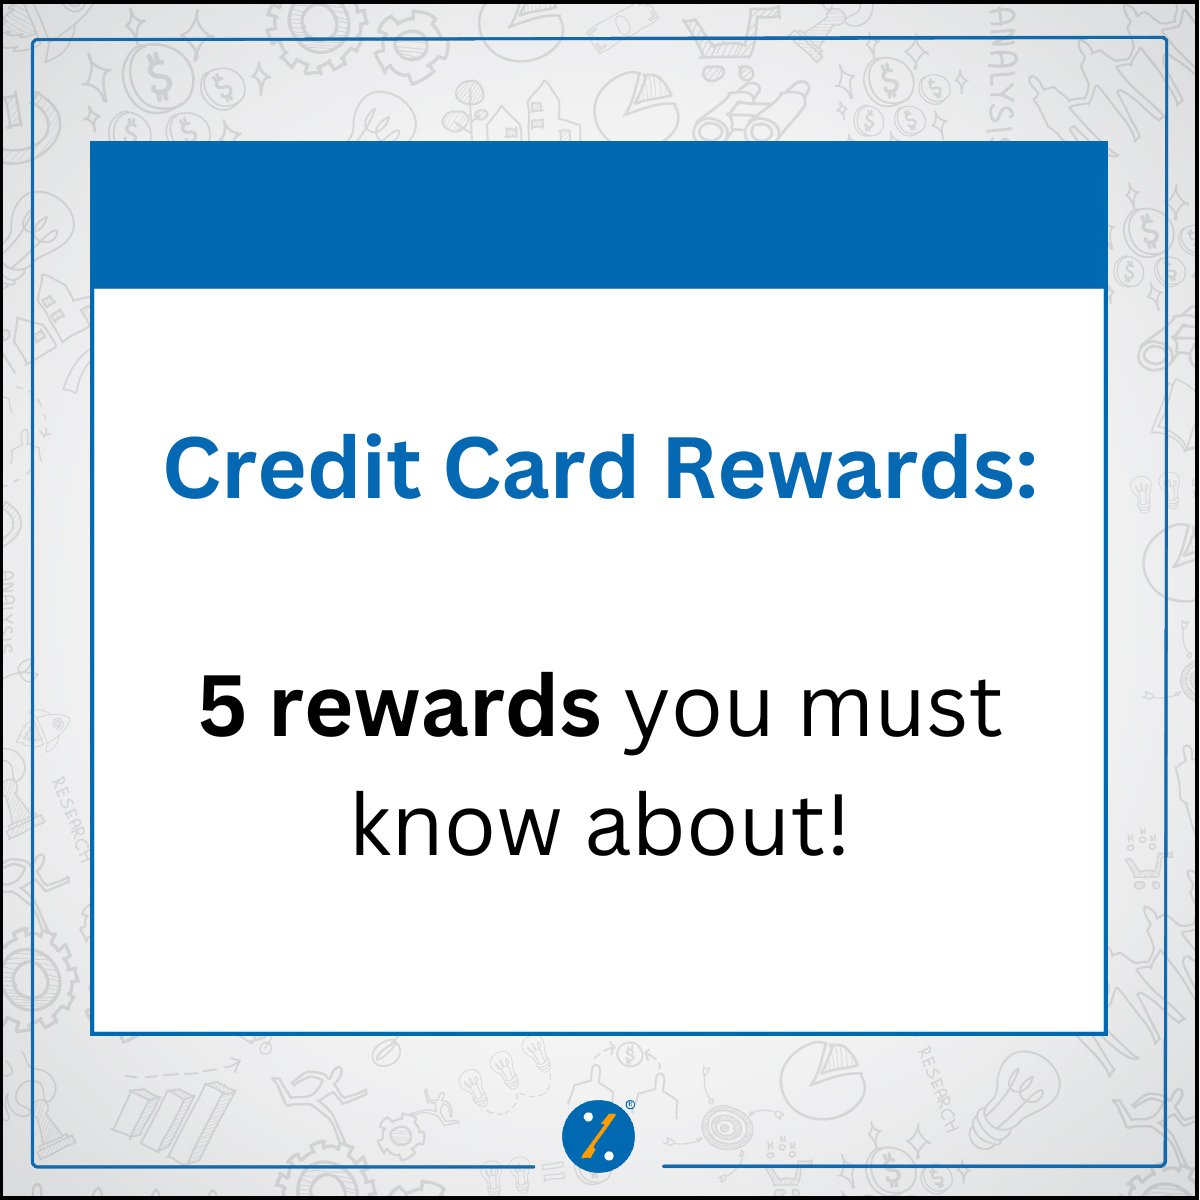 #personalfinances 

The best part of using Credit Cards is the incredible number of #Rewards  you get!

Here are 5 kinds of rewards you earn by being a credit card use:

(1/6)

#shoppingonline #WorldPressFreedomDay #cards